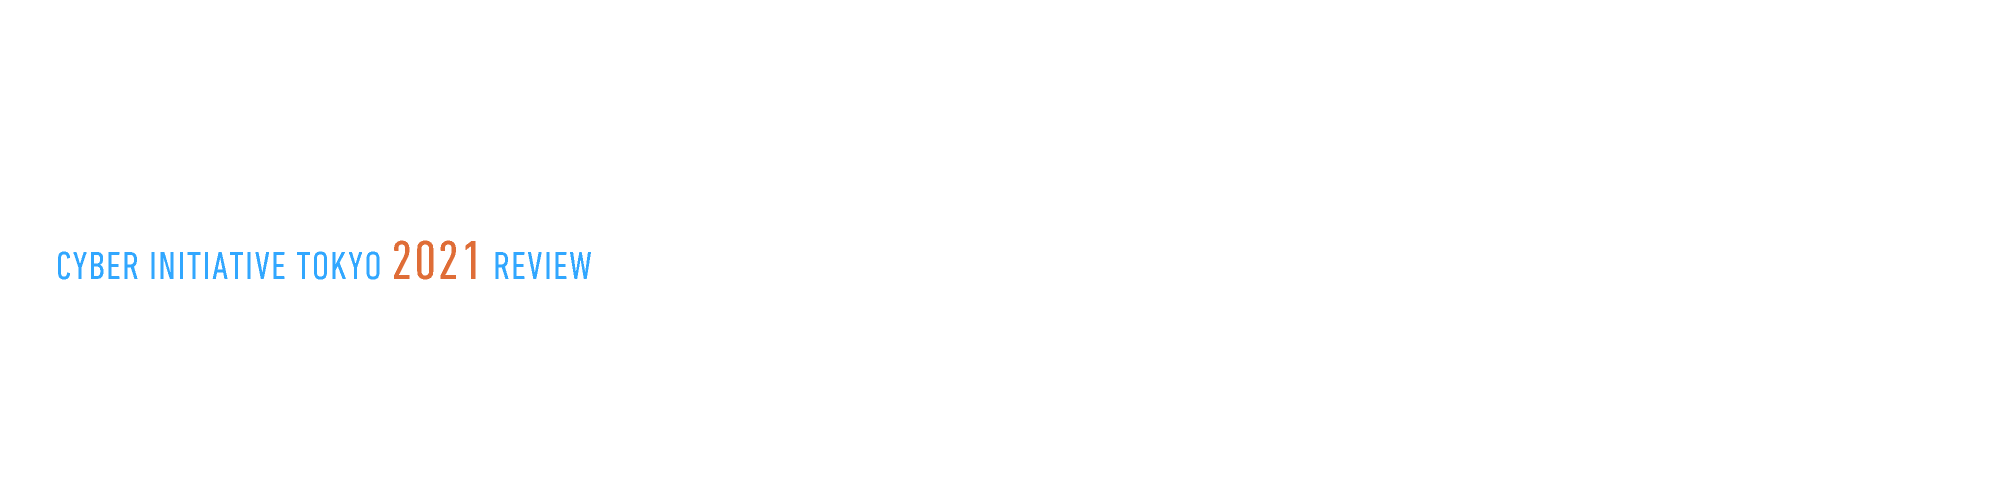 A World on the Verge of a Major Digital Revolution: Beyond Division, Conflict, and Disparity